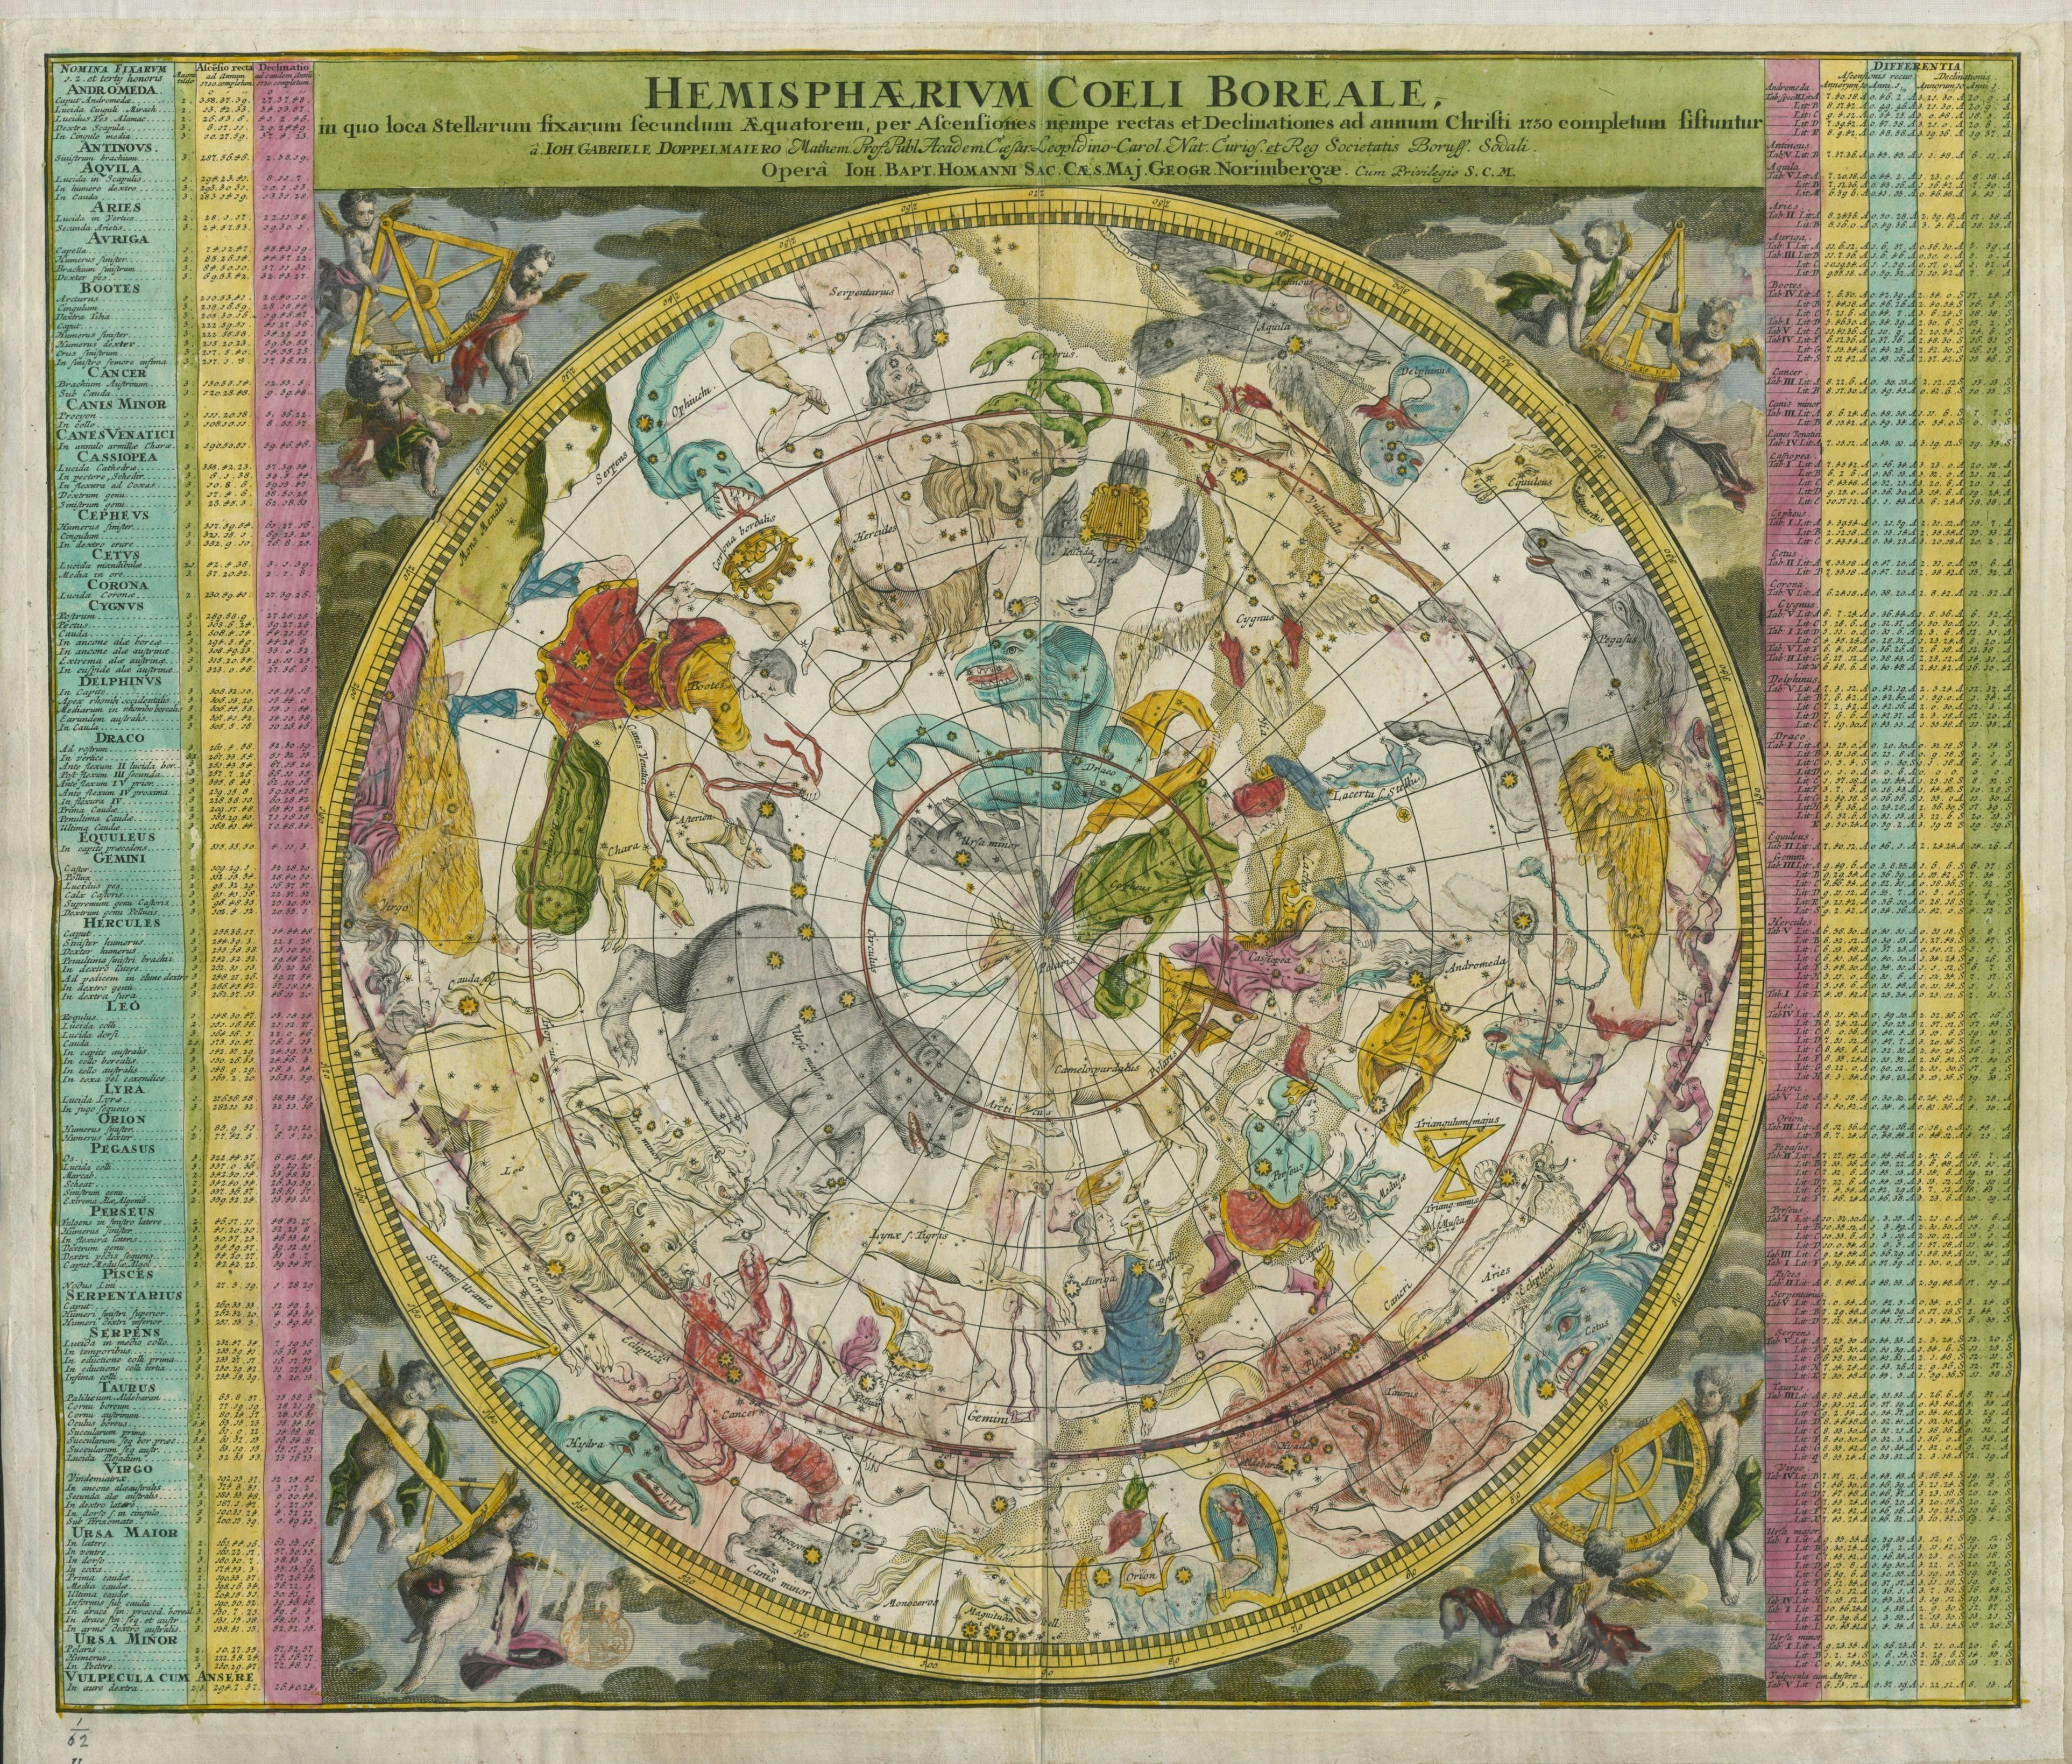 A medieval-style map with drawings of fantastic beasts and a rainbow border. 